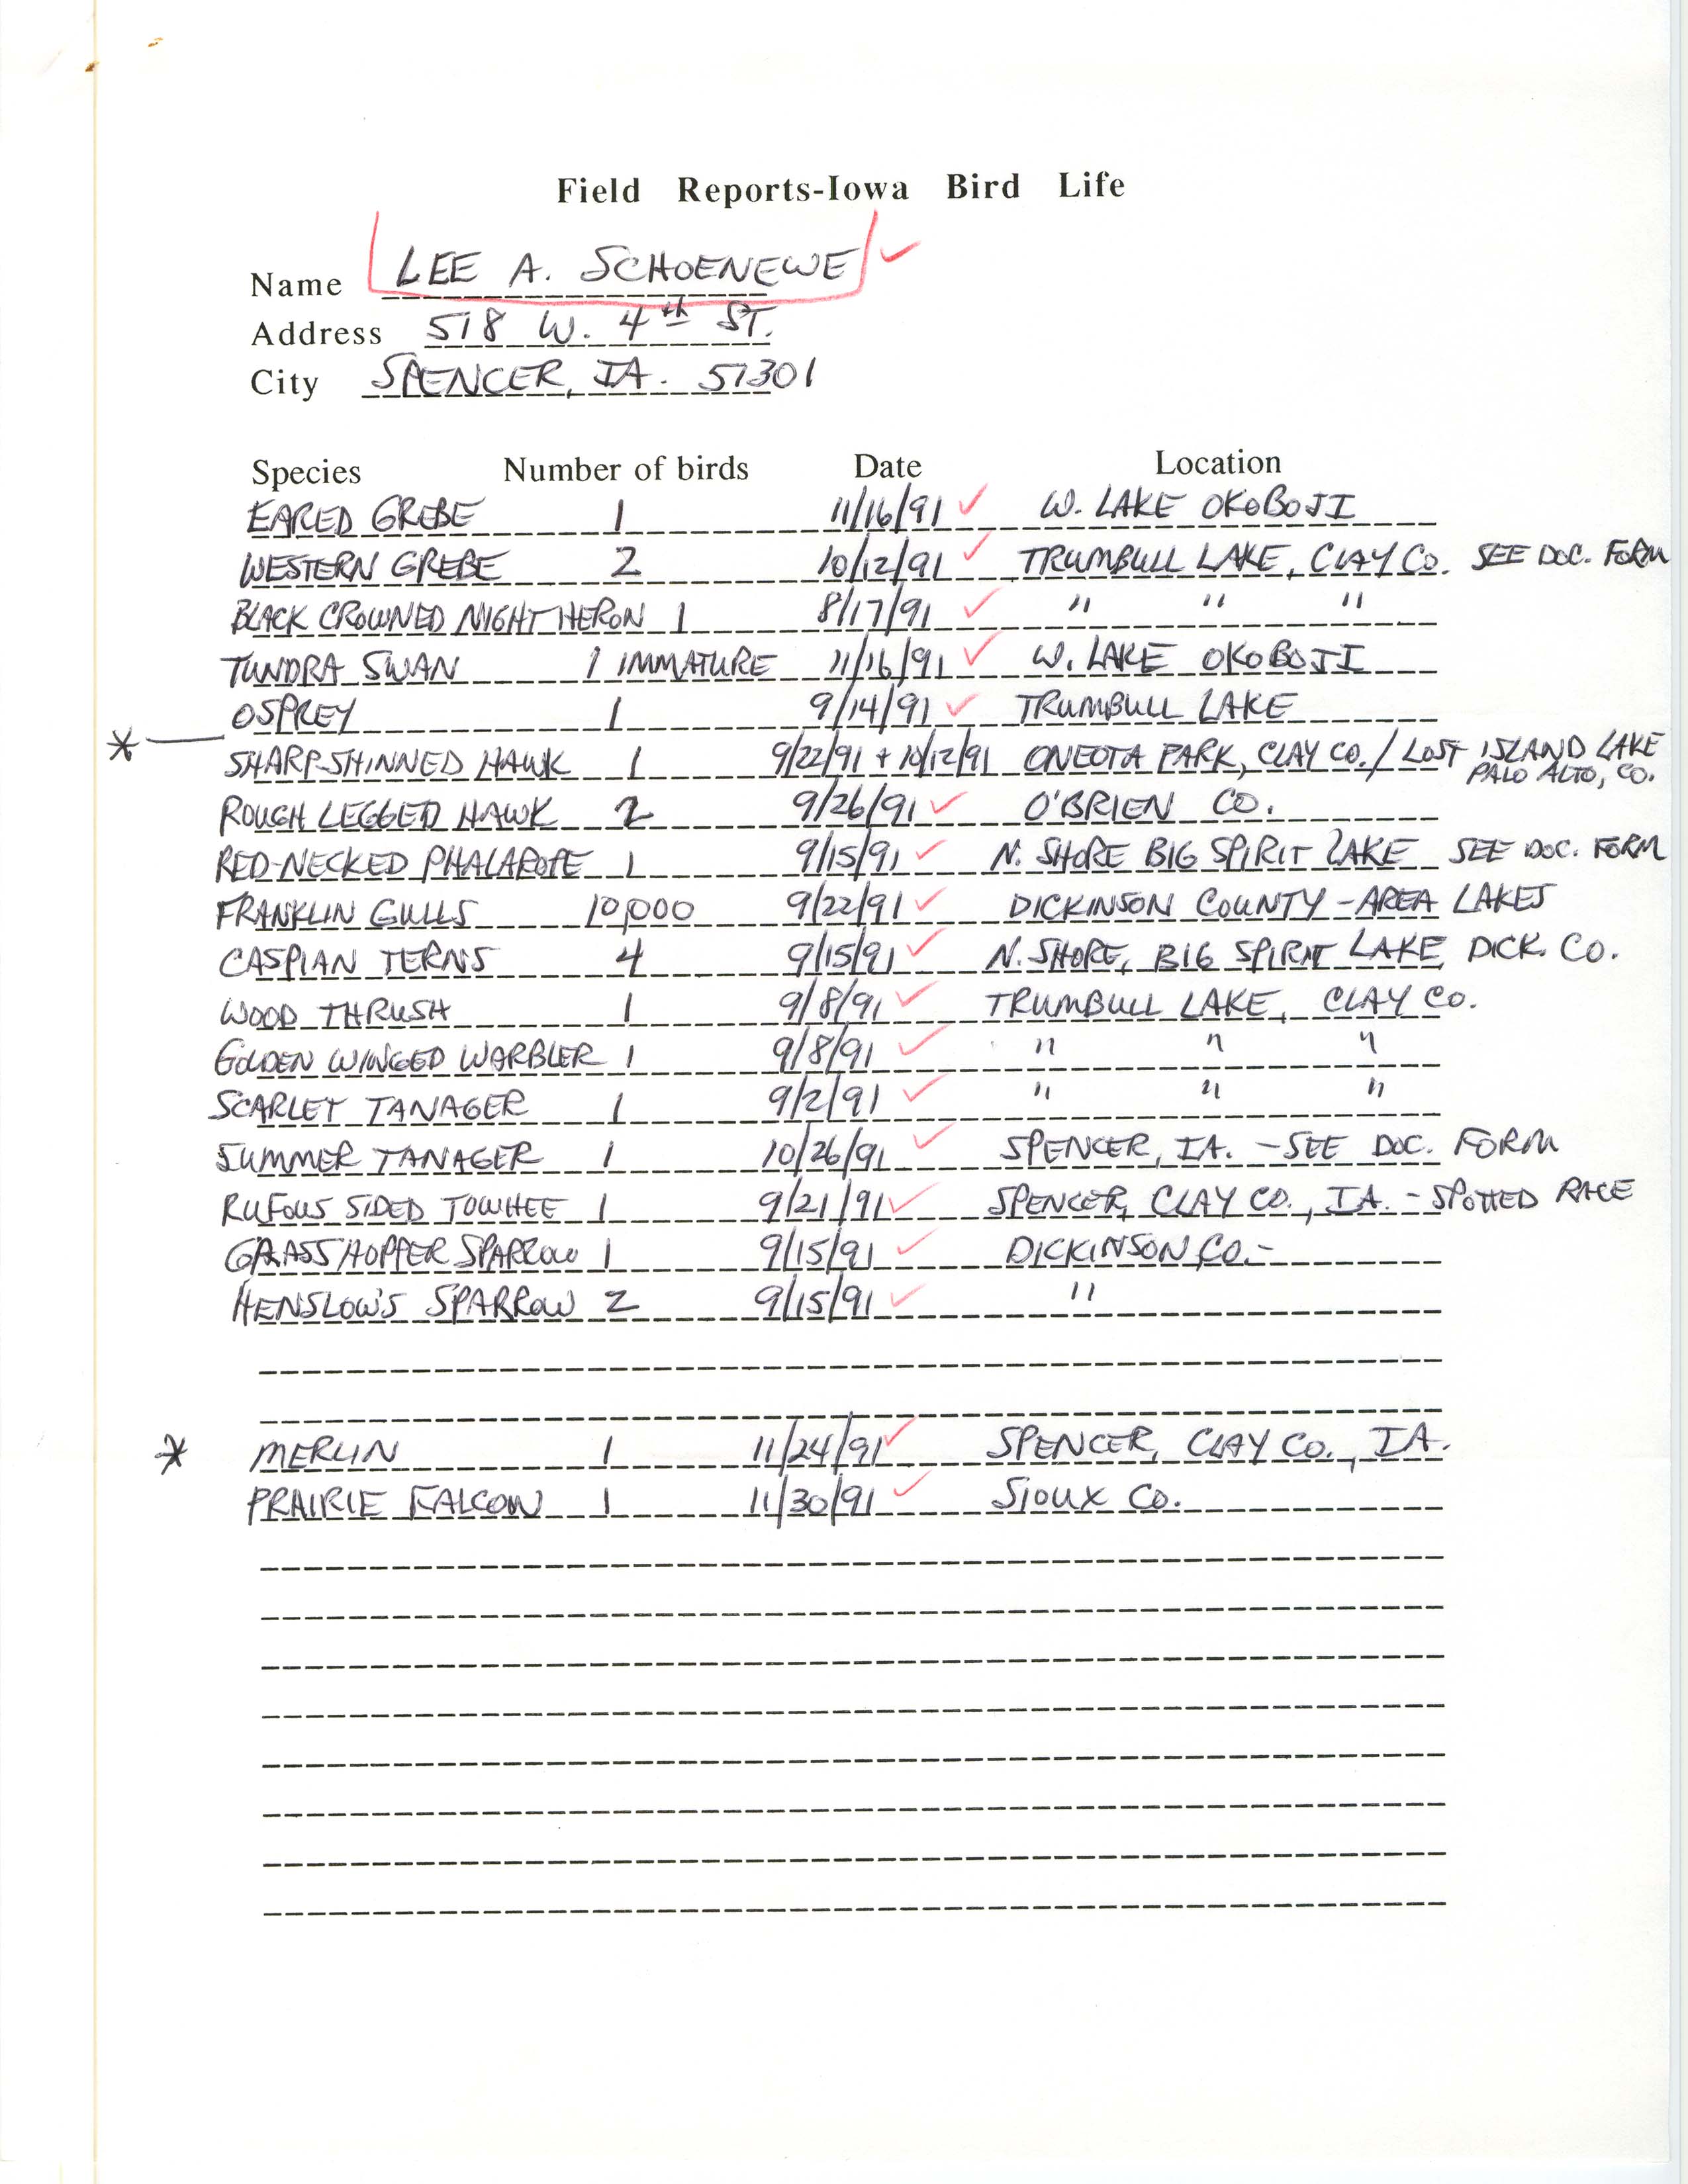 Field notes contributed by Lee A. Schoenewe, fall 1991